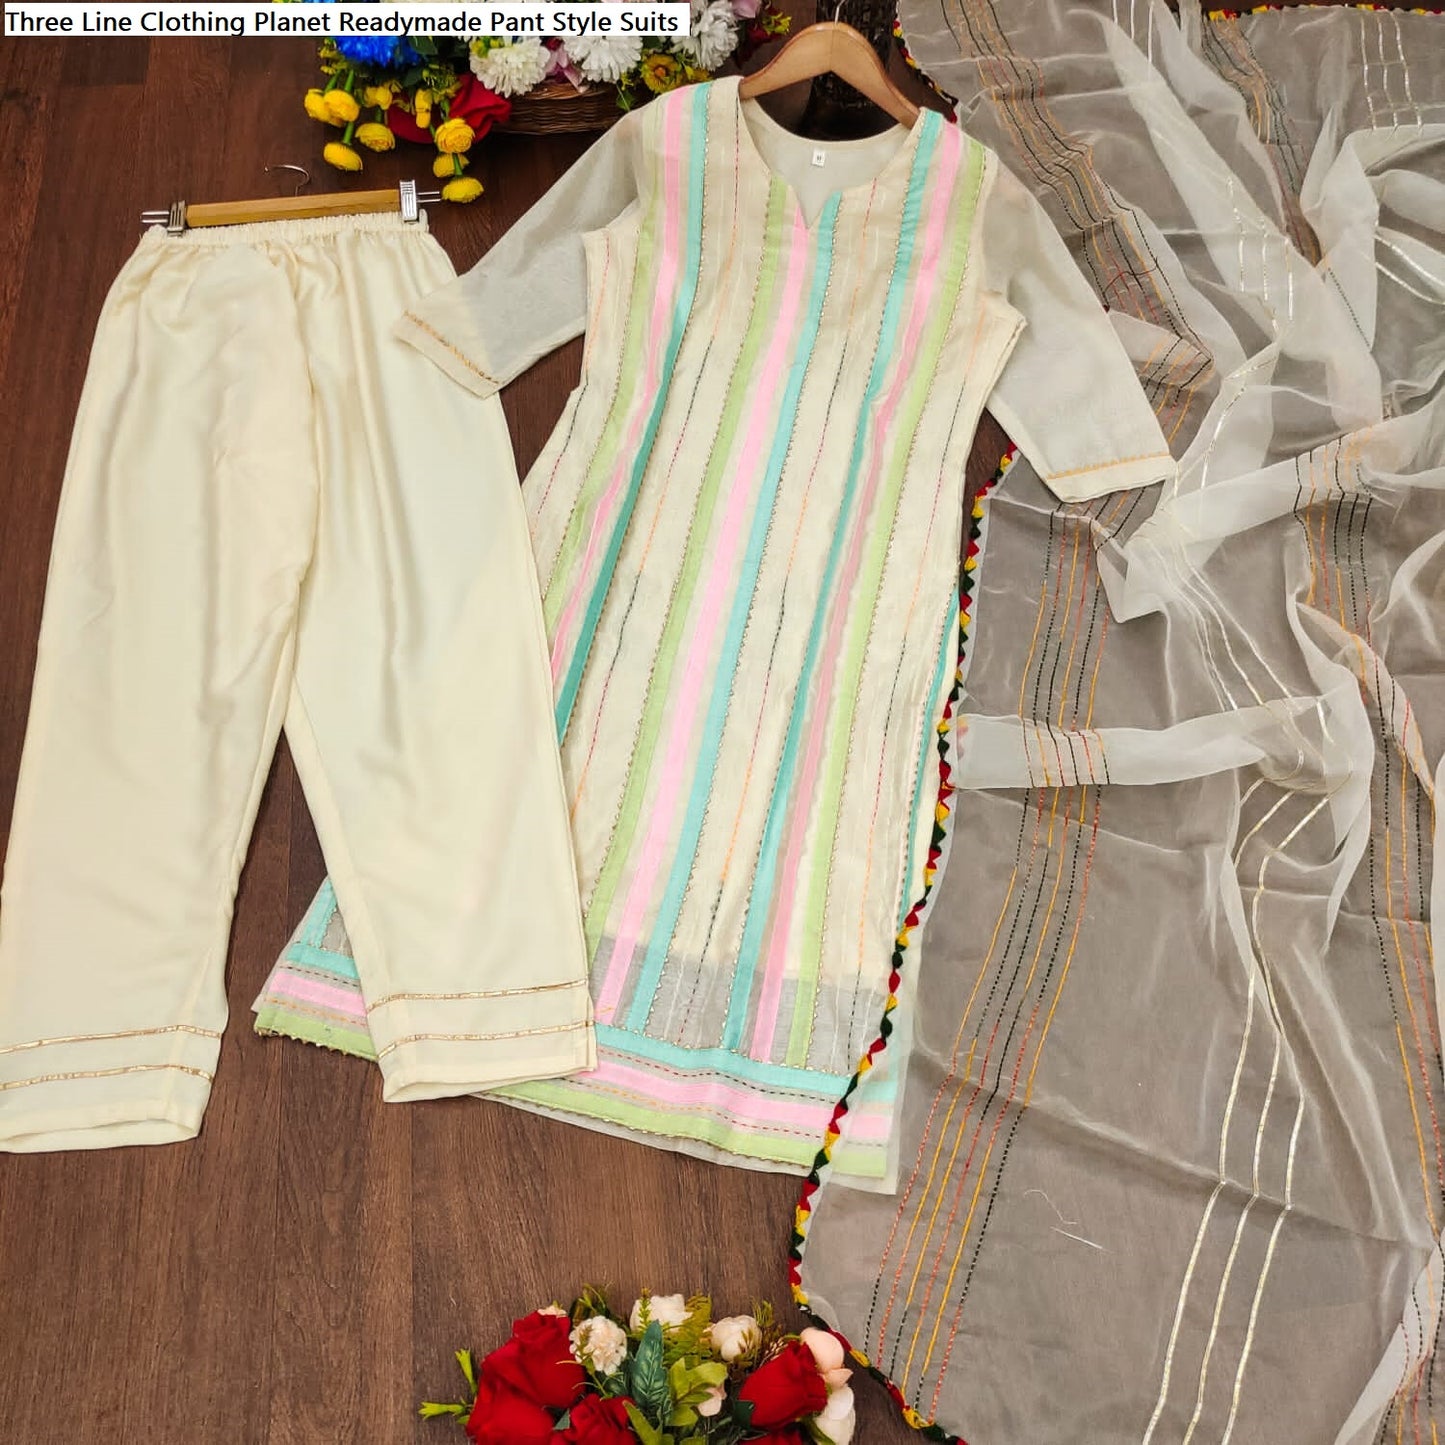 Three Line Clothing Planet Chanderi Readymade Pant Style Suits